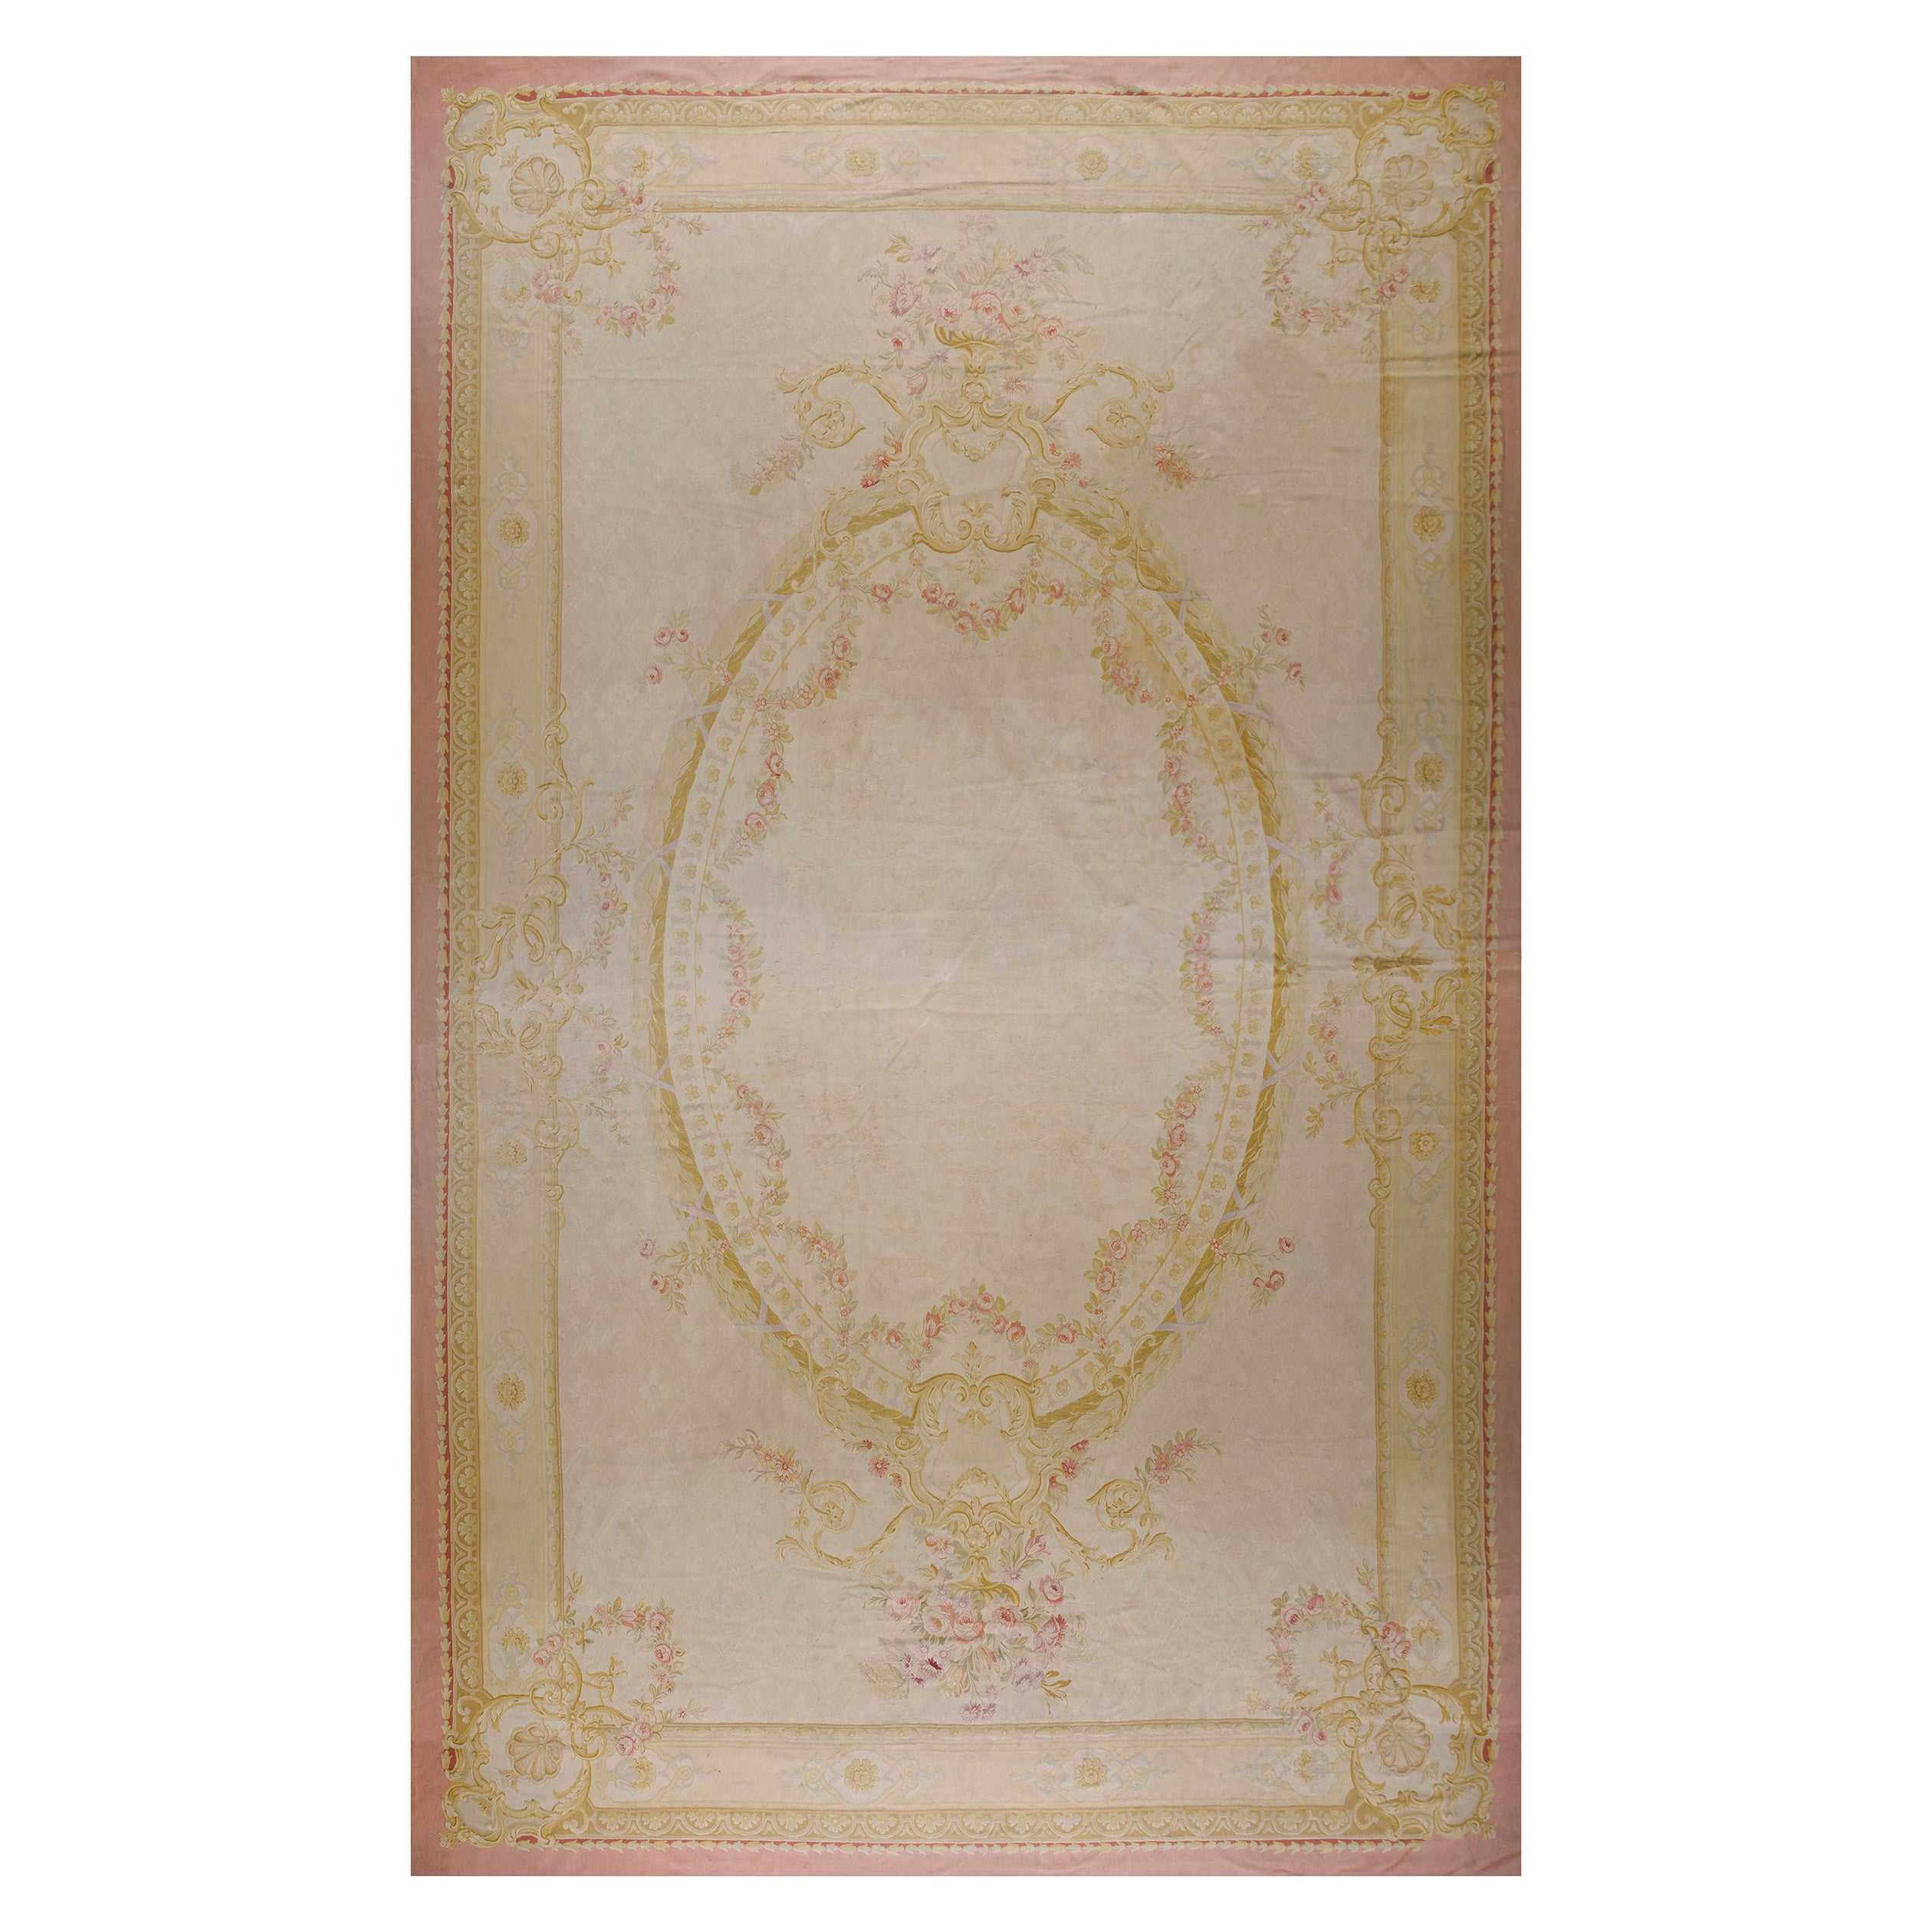 Early 20th Century French Aubusson Carpet ( 13' 6'' x 22' 6'' - 412 x 686 cm)